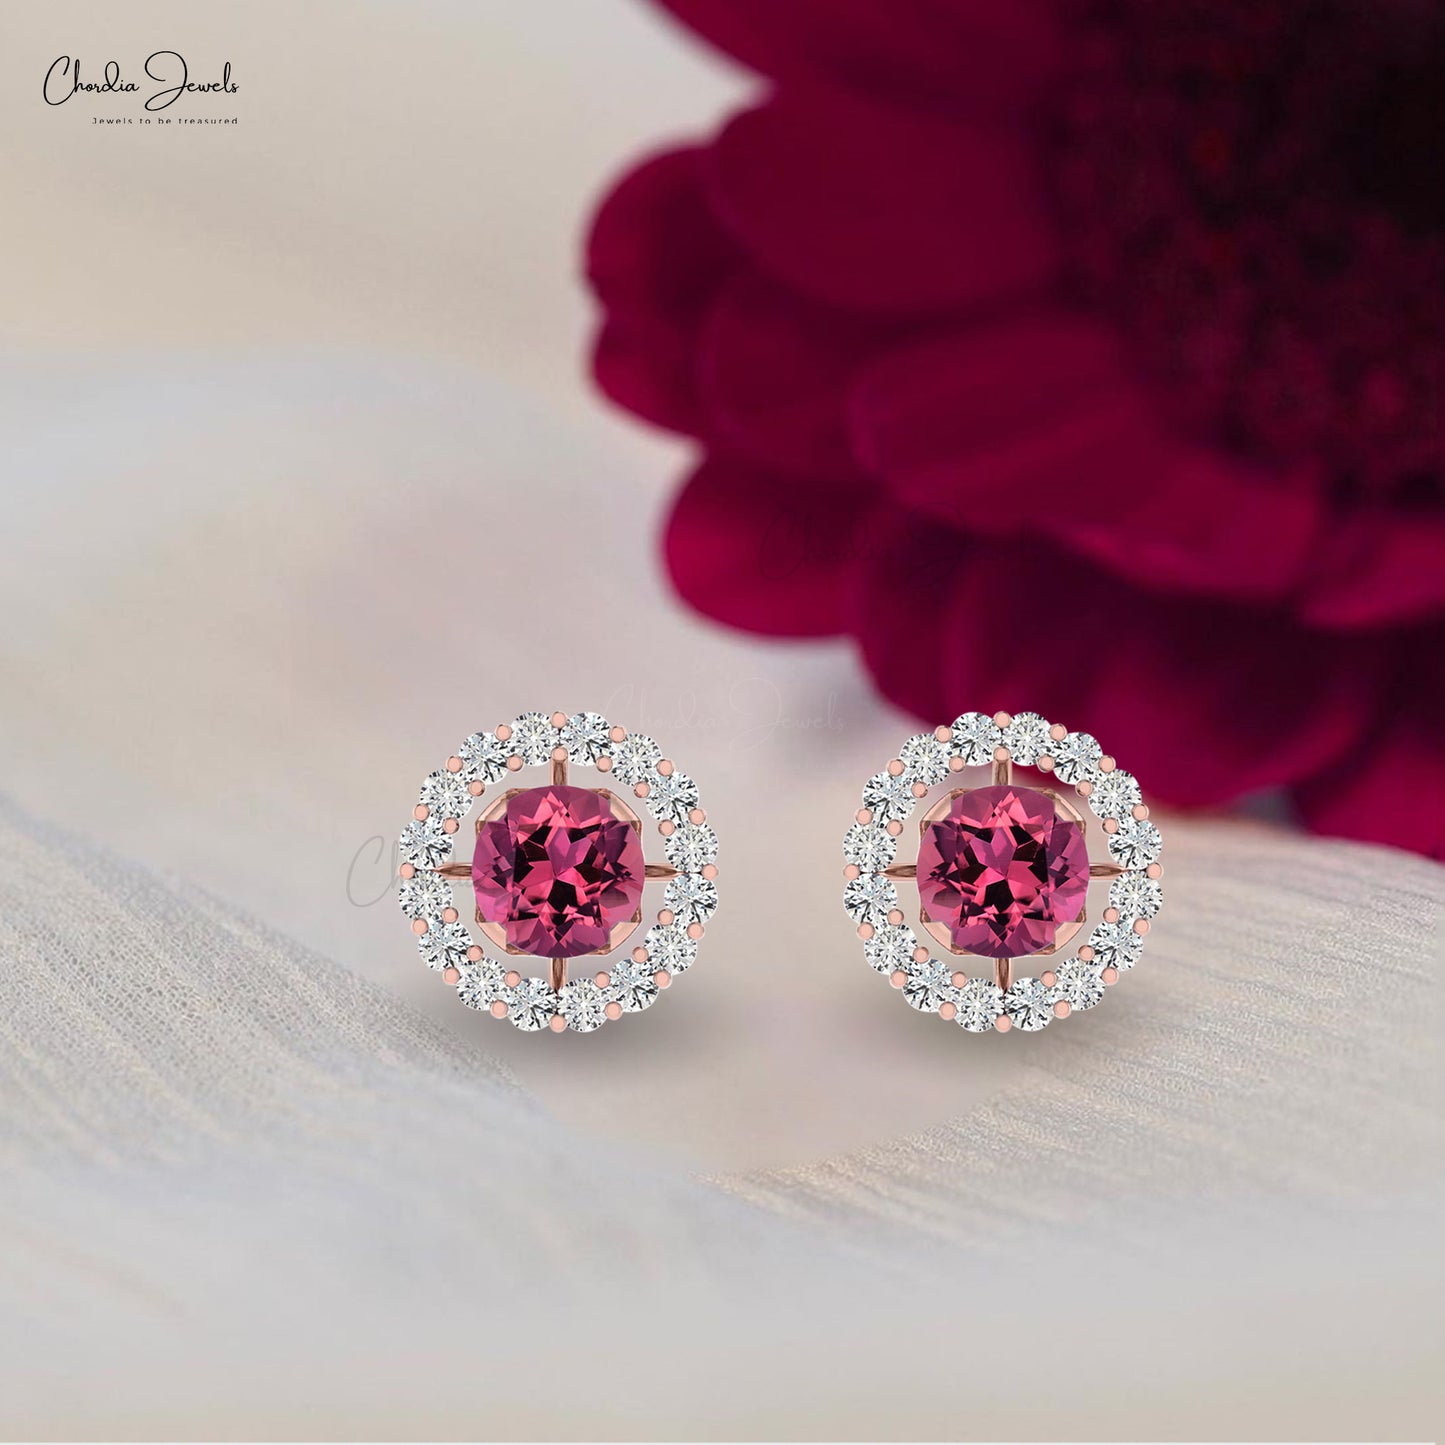 Load image into Gallery viewer, Natural Pink Tourmaline Diamond 14K Gold Halo Stud Earrings For Women
